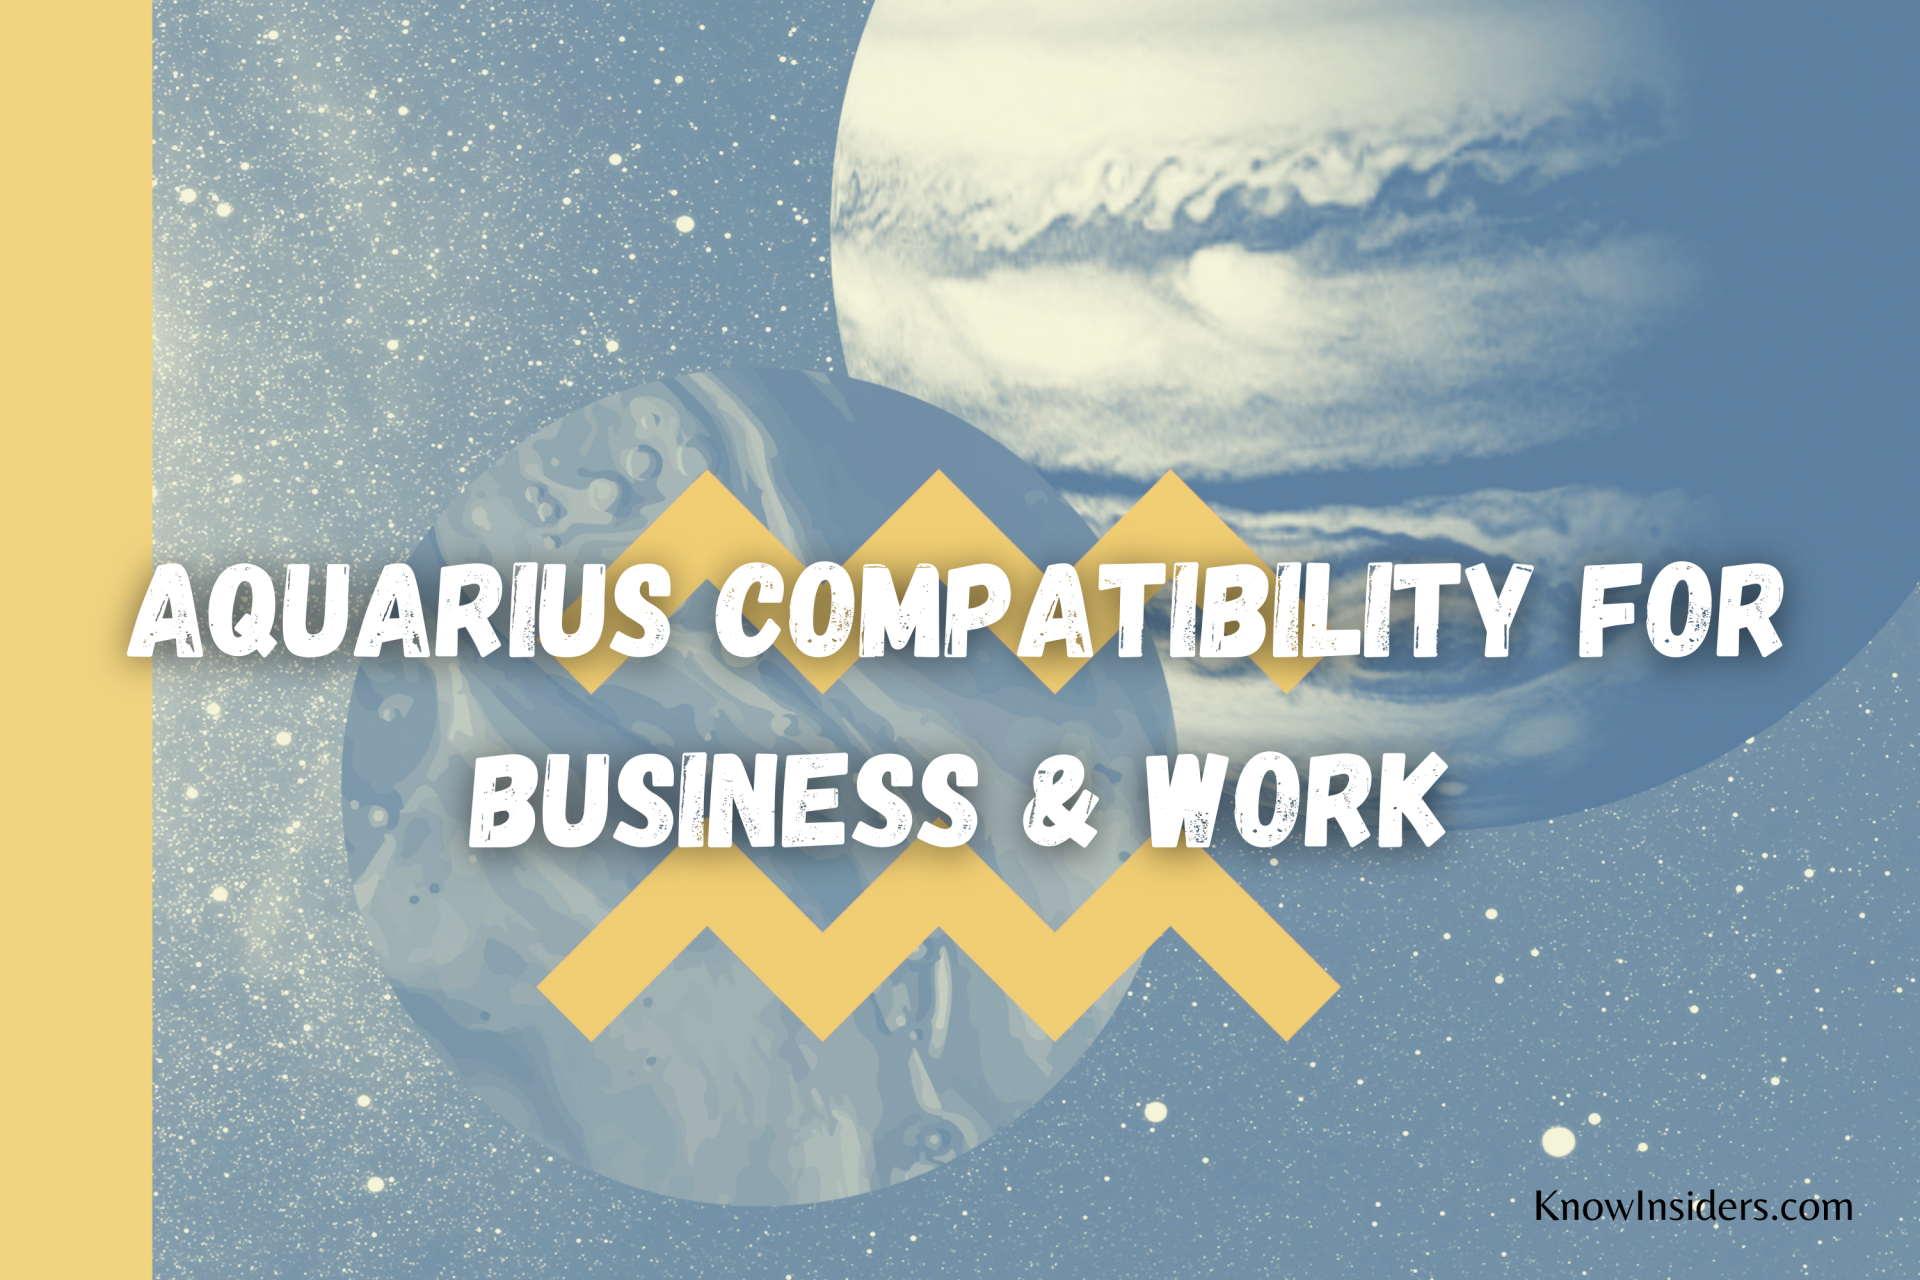 AQUARIUS - Top 3 Most Compatible Zodiac Signs in Work & Business